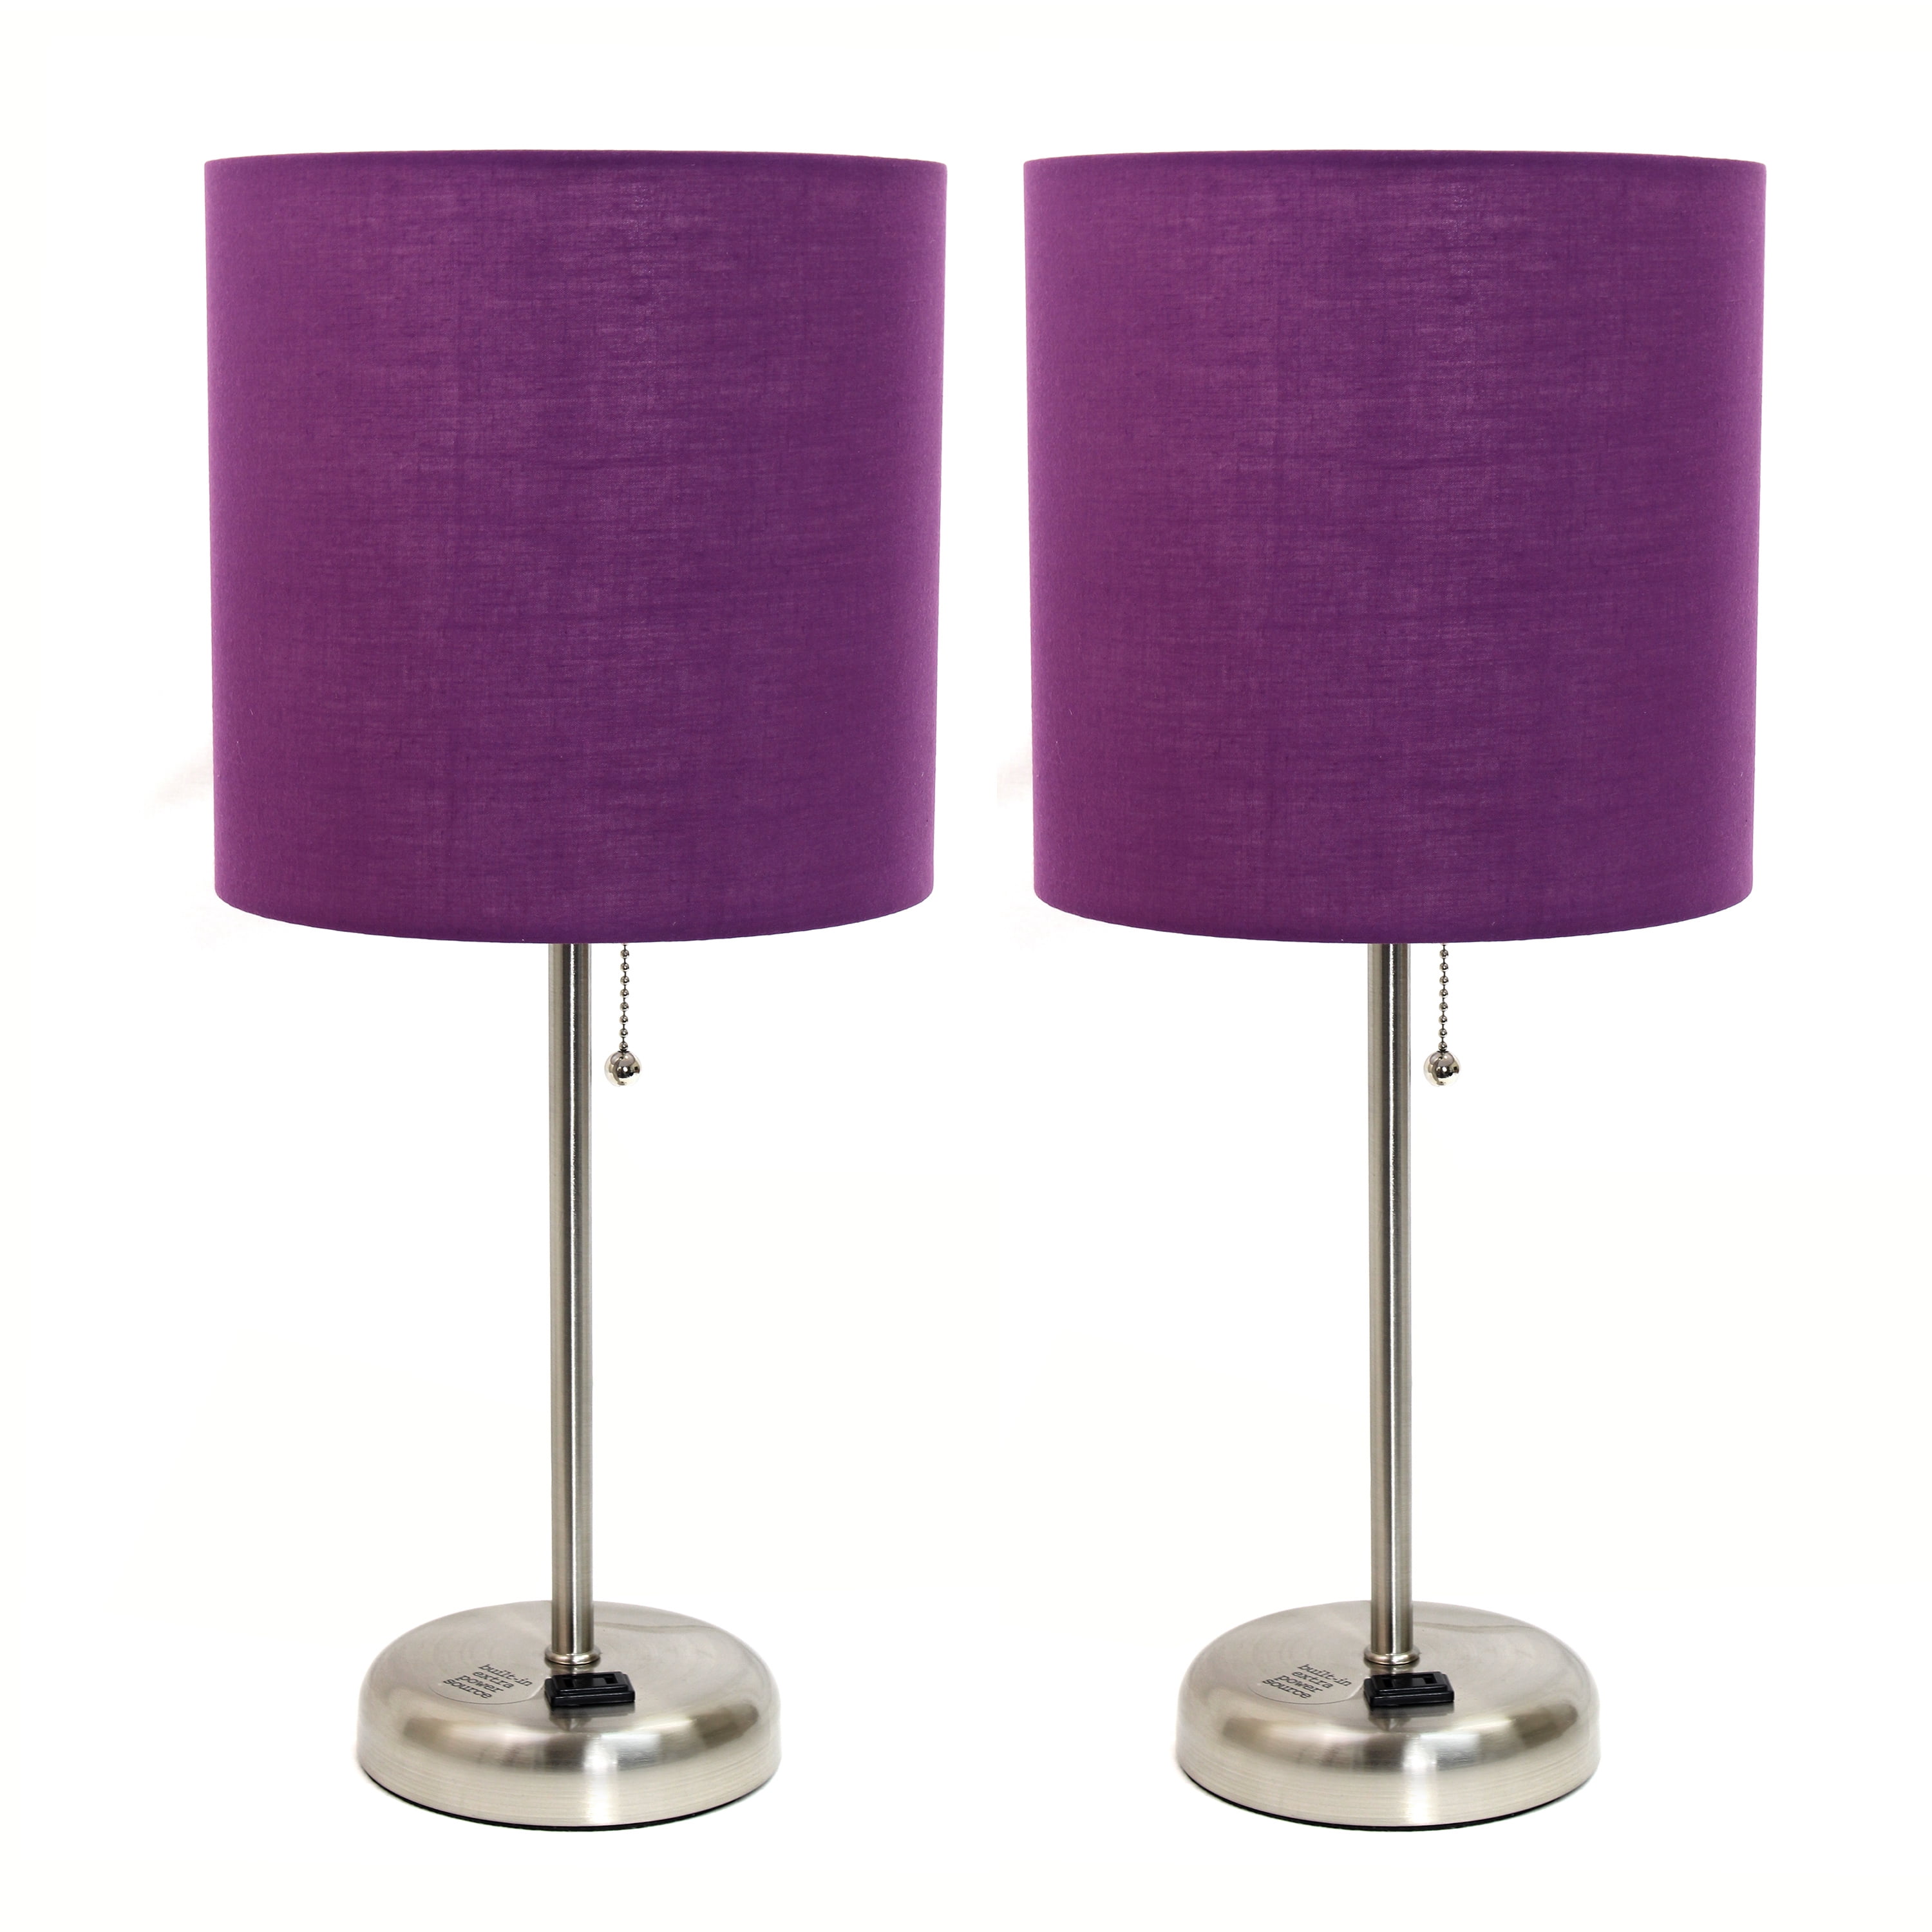 Lc2001-prp-2pk Brushed Steel Stick Table Lamp With Charging Outlet & Fabric Shade, Purple - Set Of 2